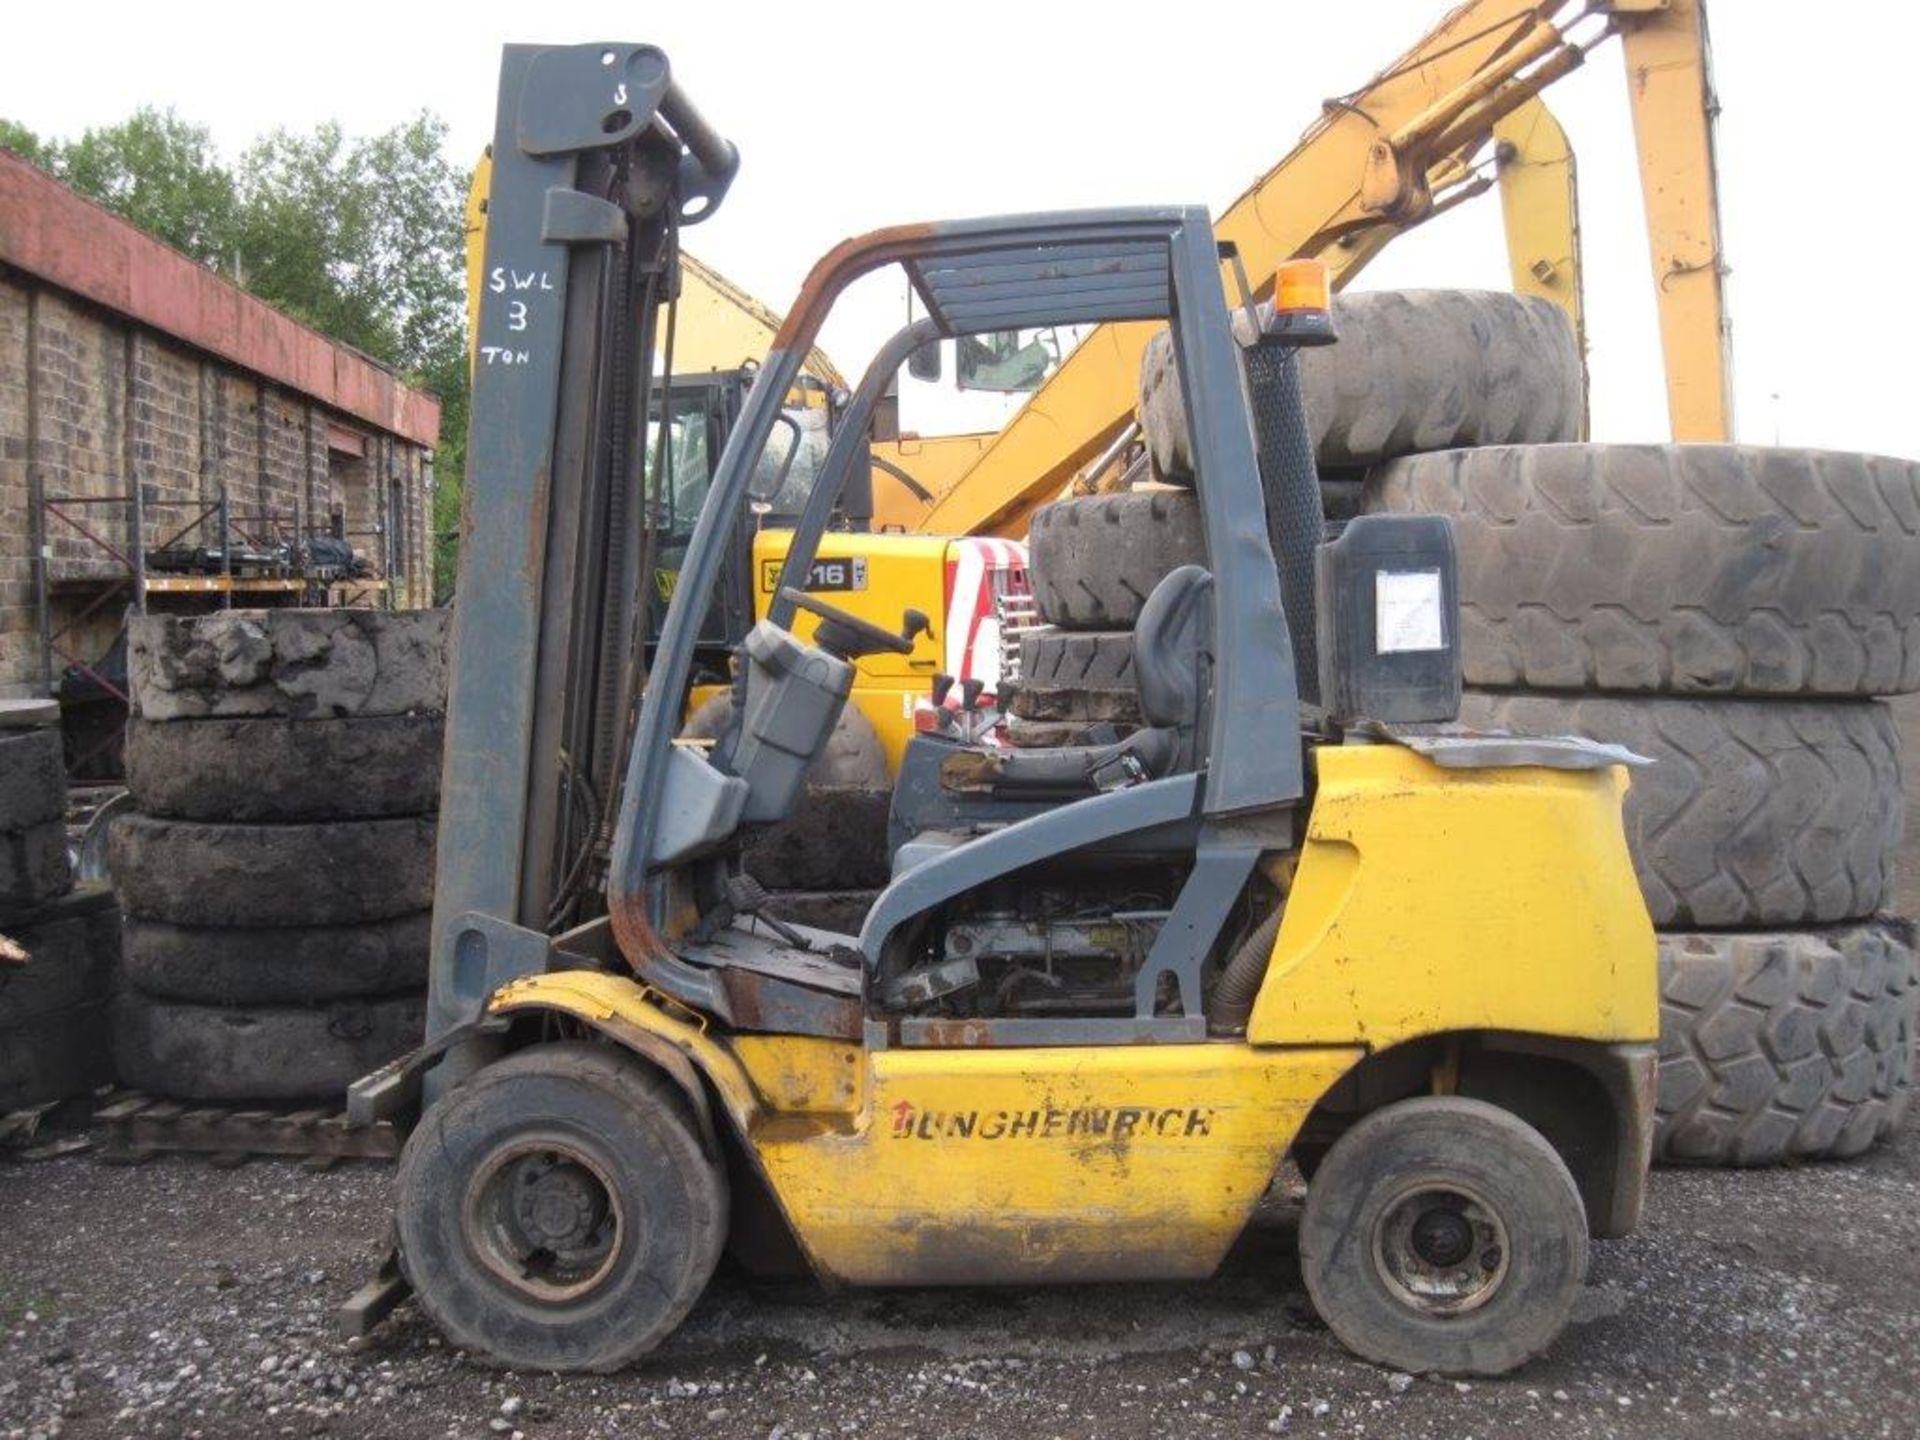 Jungheinrich Forklift 2002, Diesel, 3 tonne capacity, Perkins engine Starts, runs and drives but - Image 2 of 3